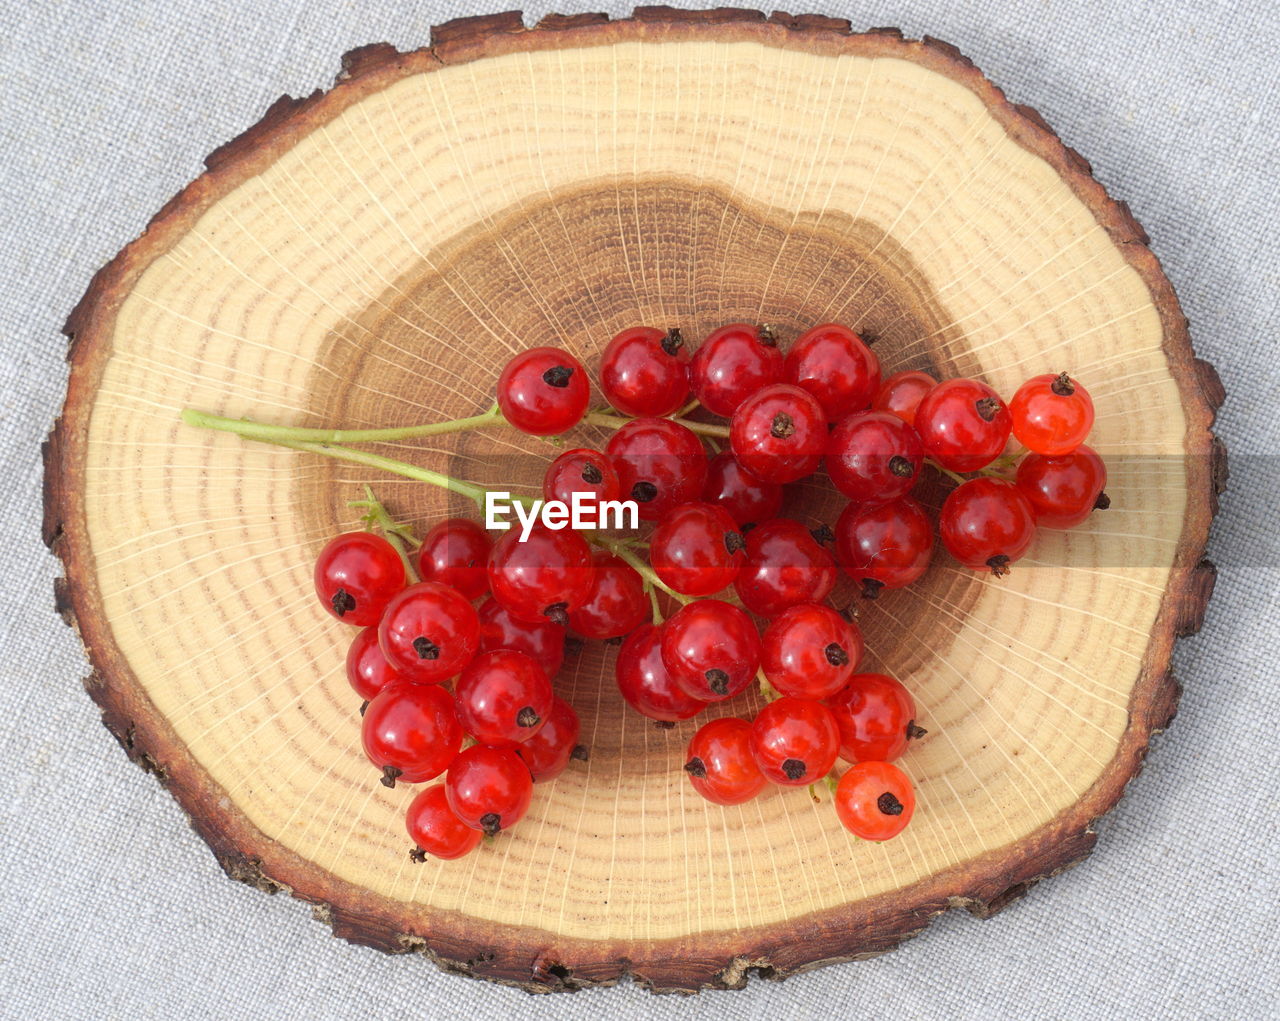 HIGH ANGLE VIEW OF CHERRIES IN CONTAINER